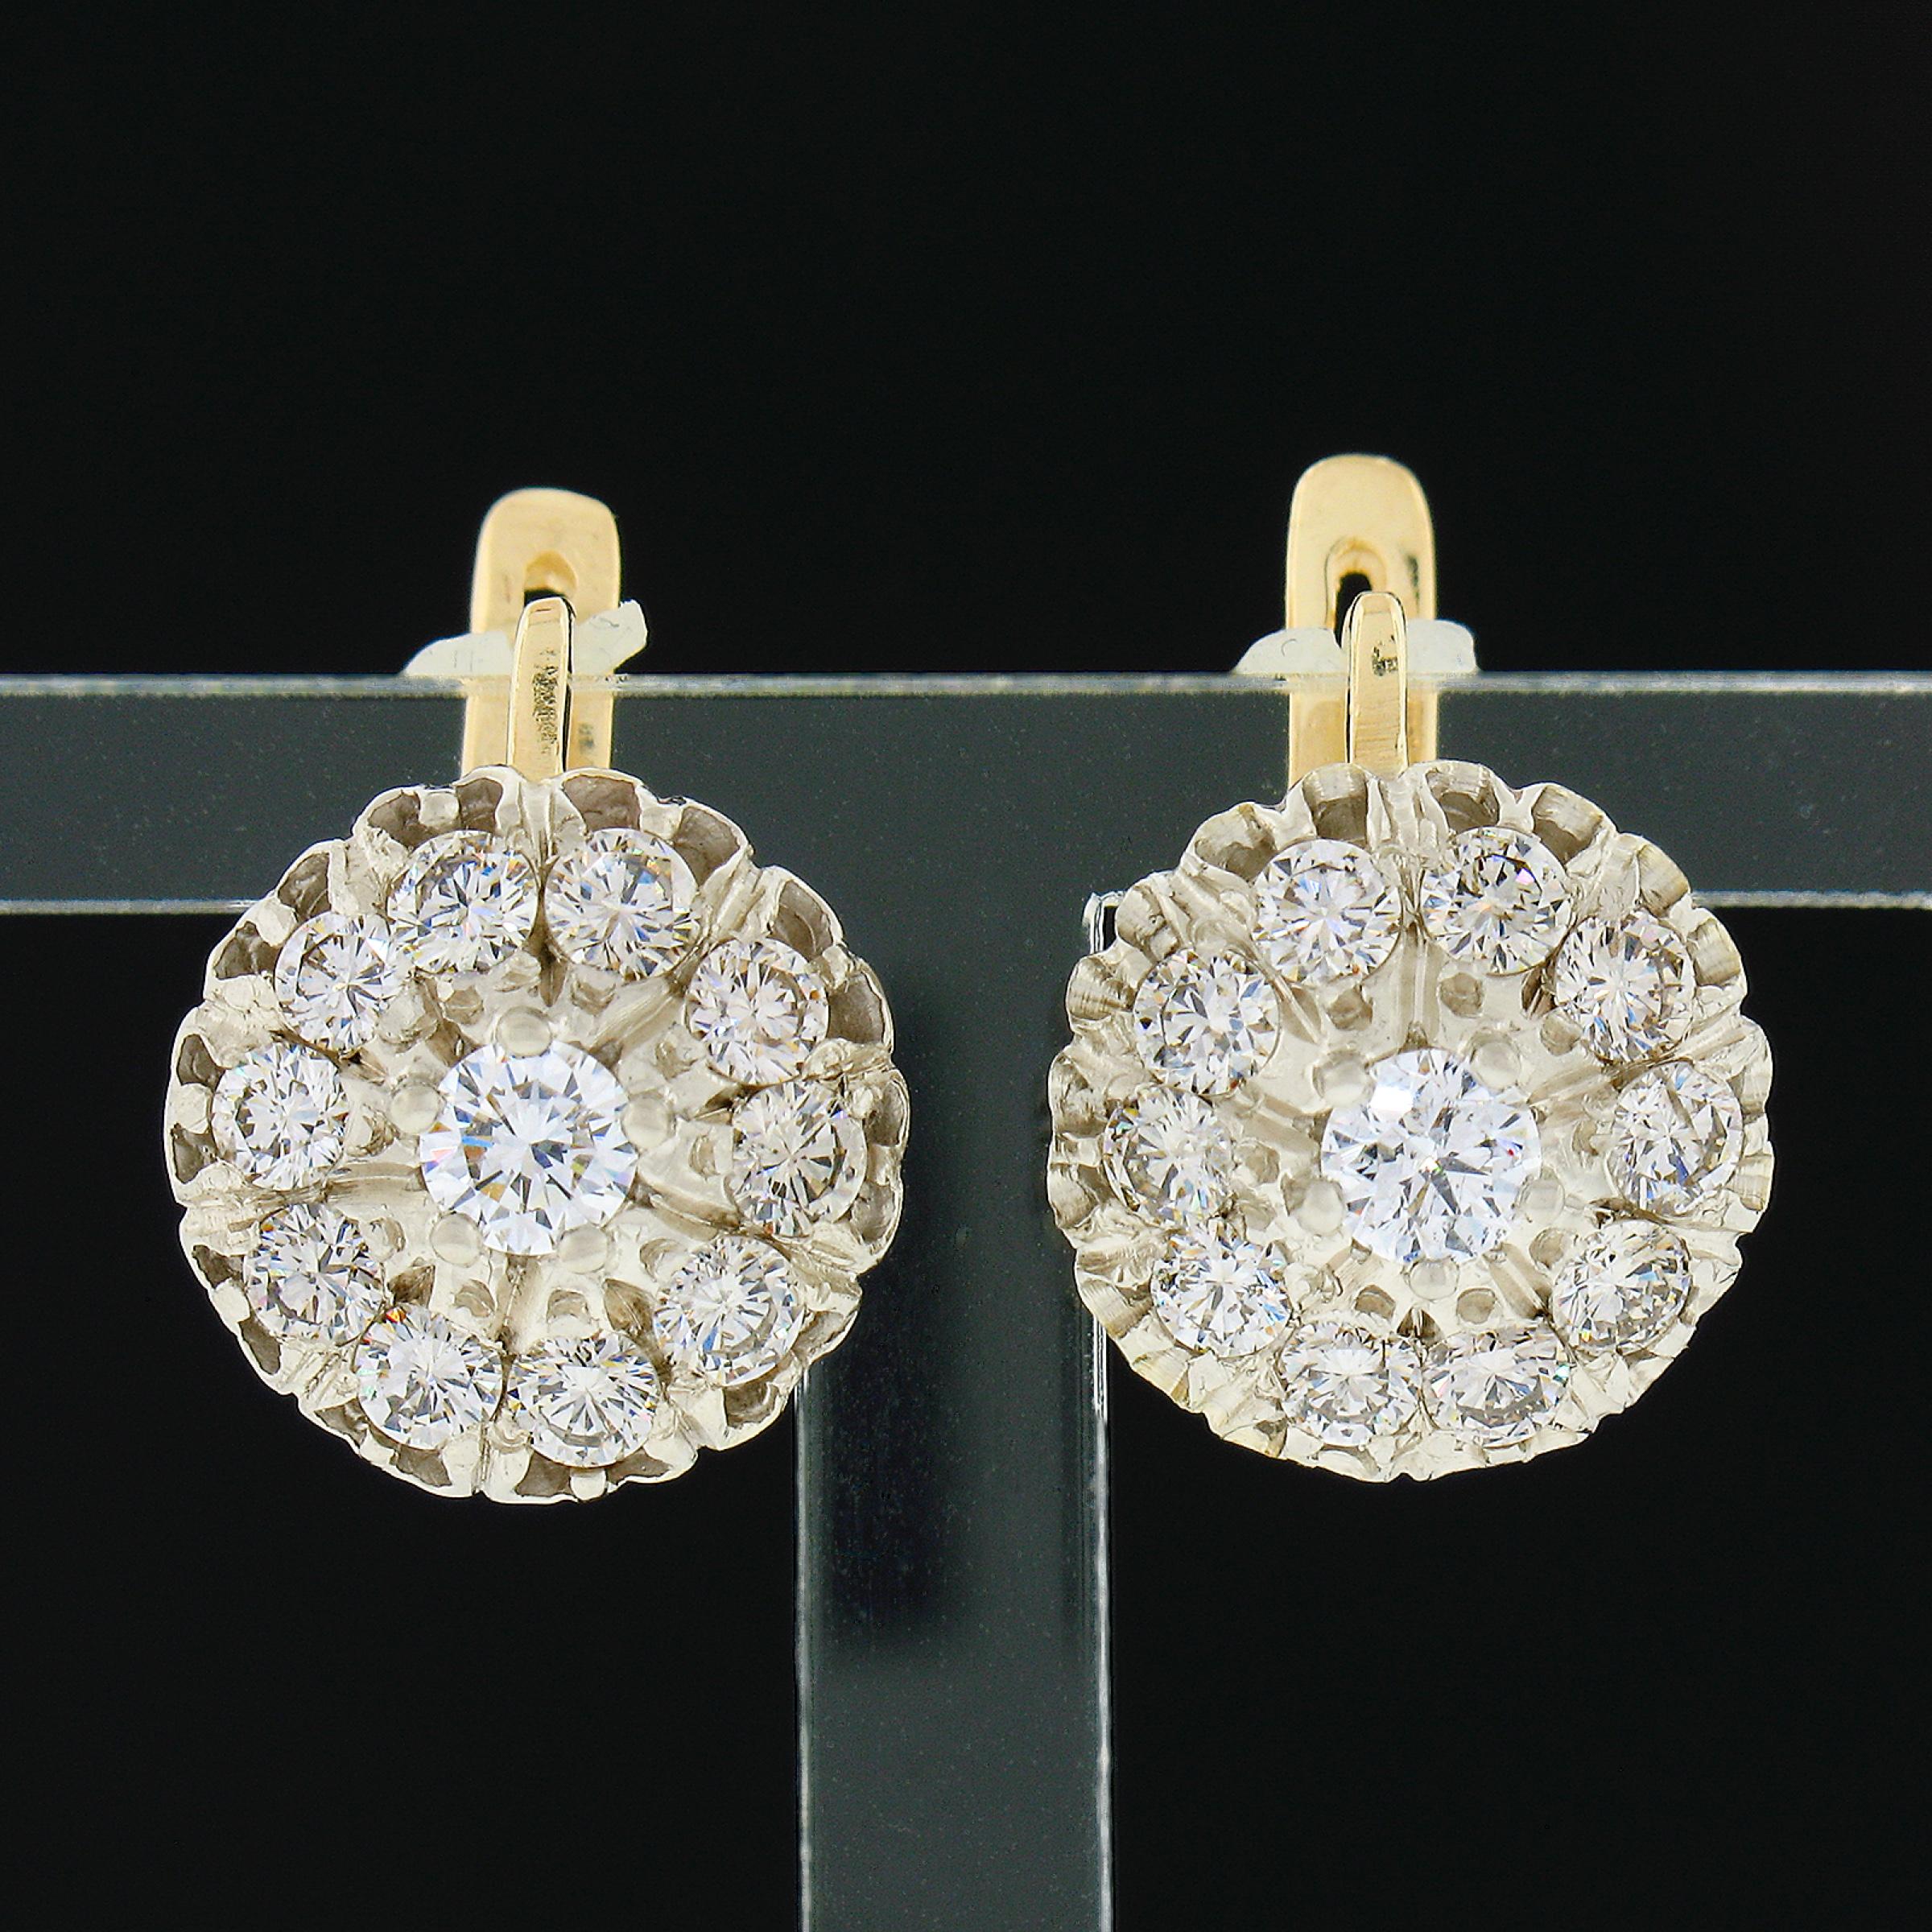 These fancy vintage earrings were crafted from solid 14k yellow and white gold and feature an elegant drop style set with a stunning and super lively diamond cluster at their bottom. These round brilliant cut diamonds total approximately 1.65